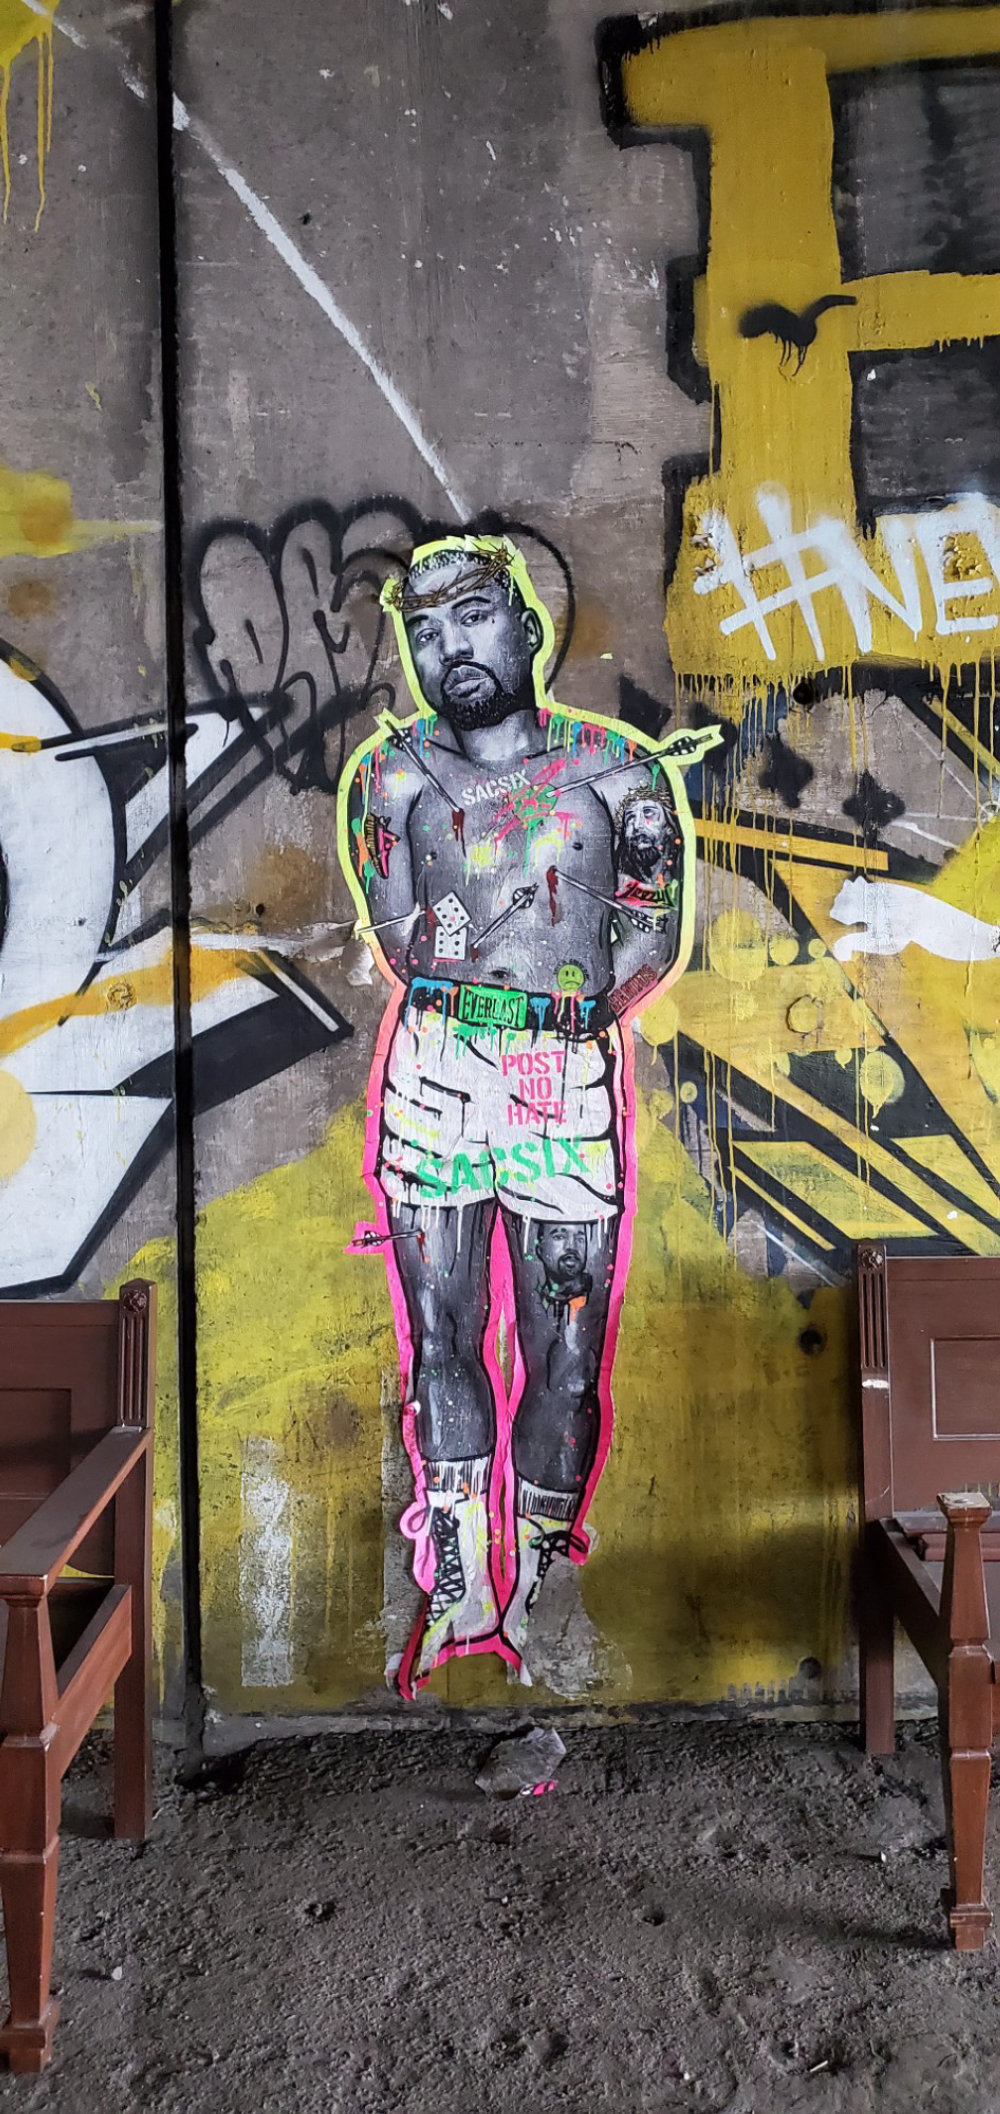 mural in Chicago by artist SacSix. Tagged: Kanye West